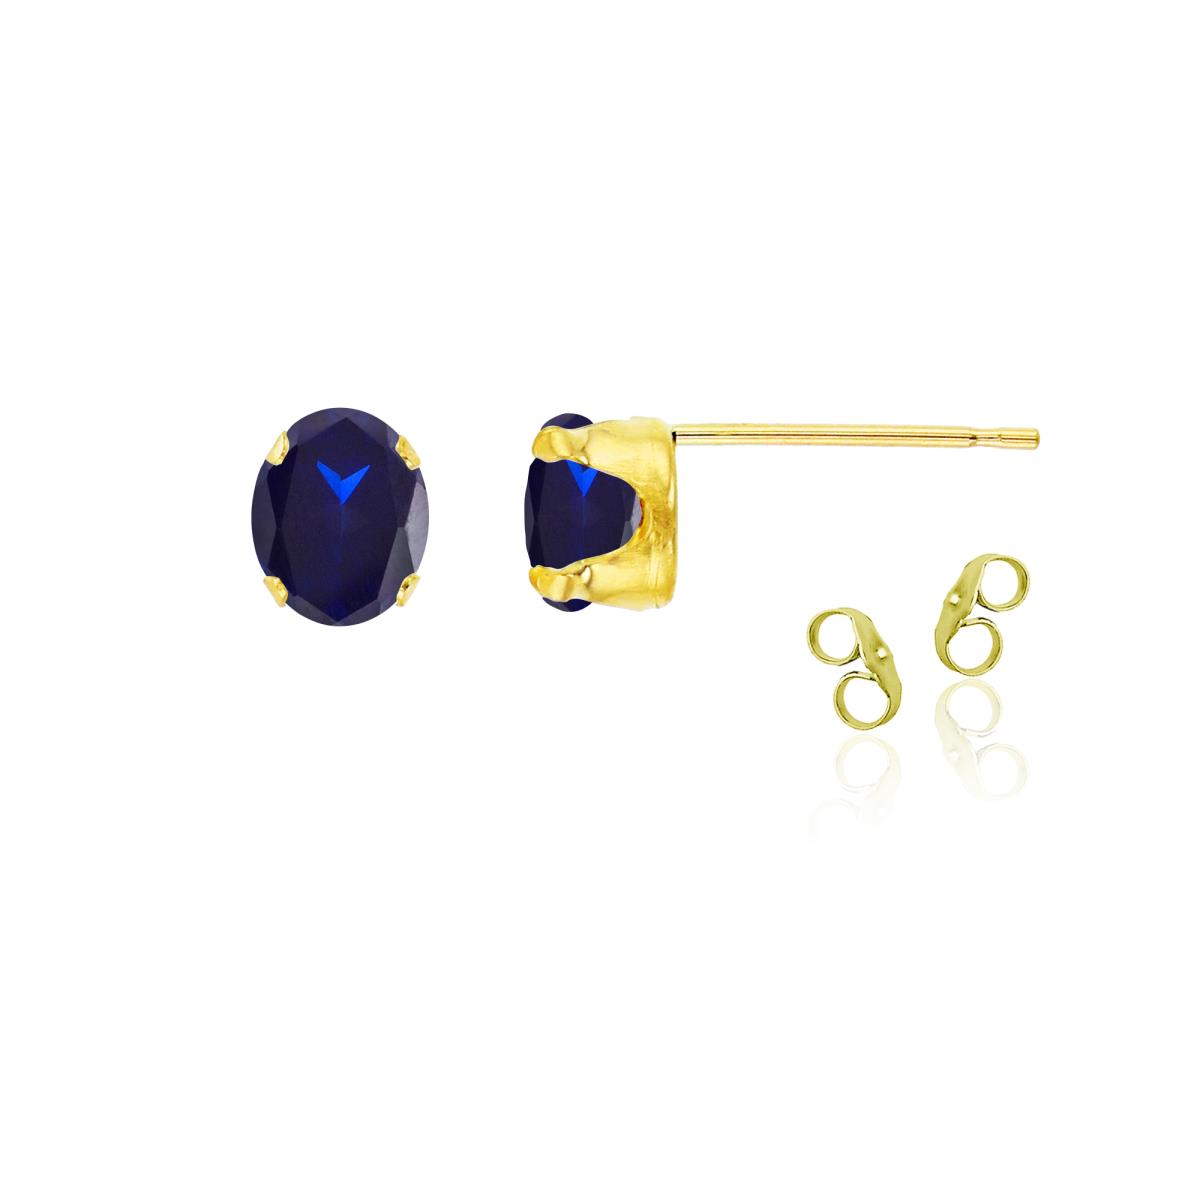 Sterling Silver Yellow 6x4mm Oval Cr Blue Sapphire Stud Earring with Clutch